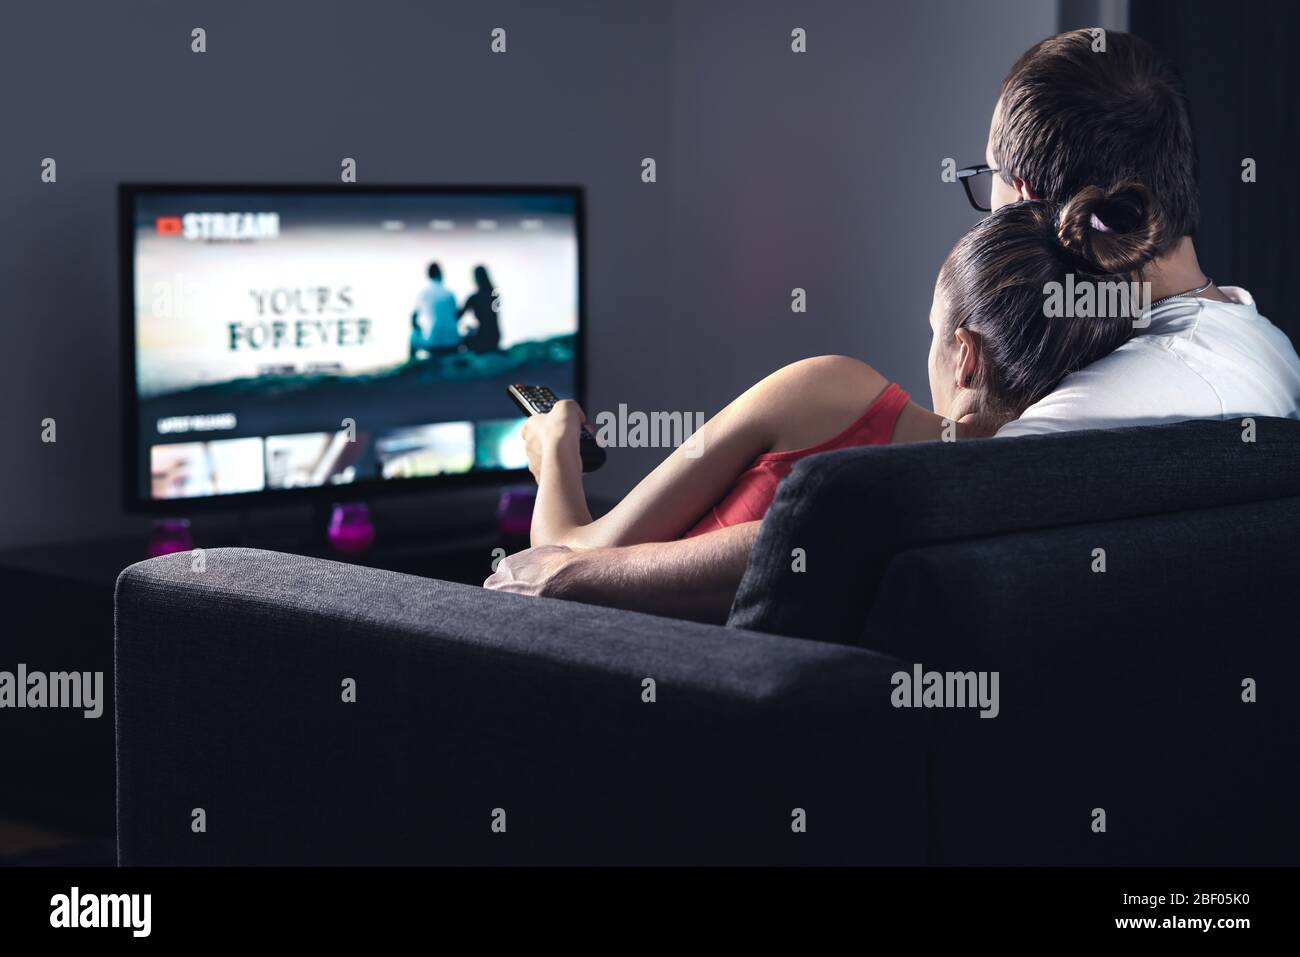 Movie stream service on smart tv. Couple watching series online. Woman choosing film or new season with remote control. Video on demand (VOD) site. Stock Photo